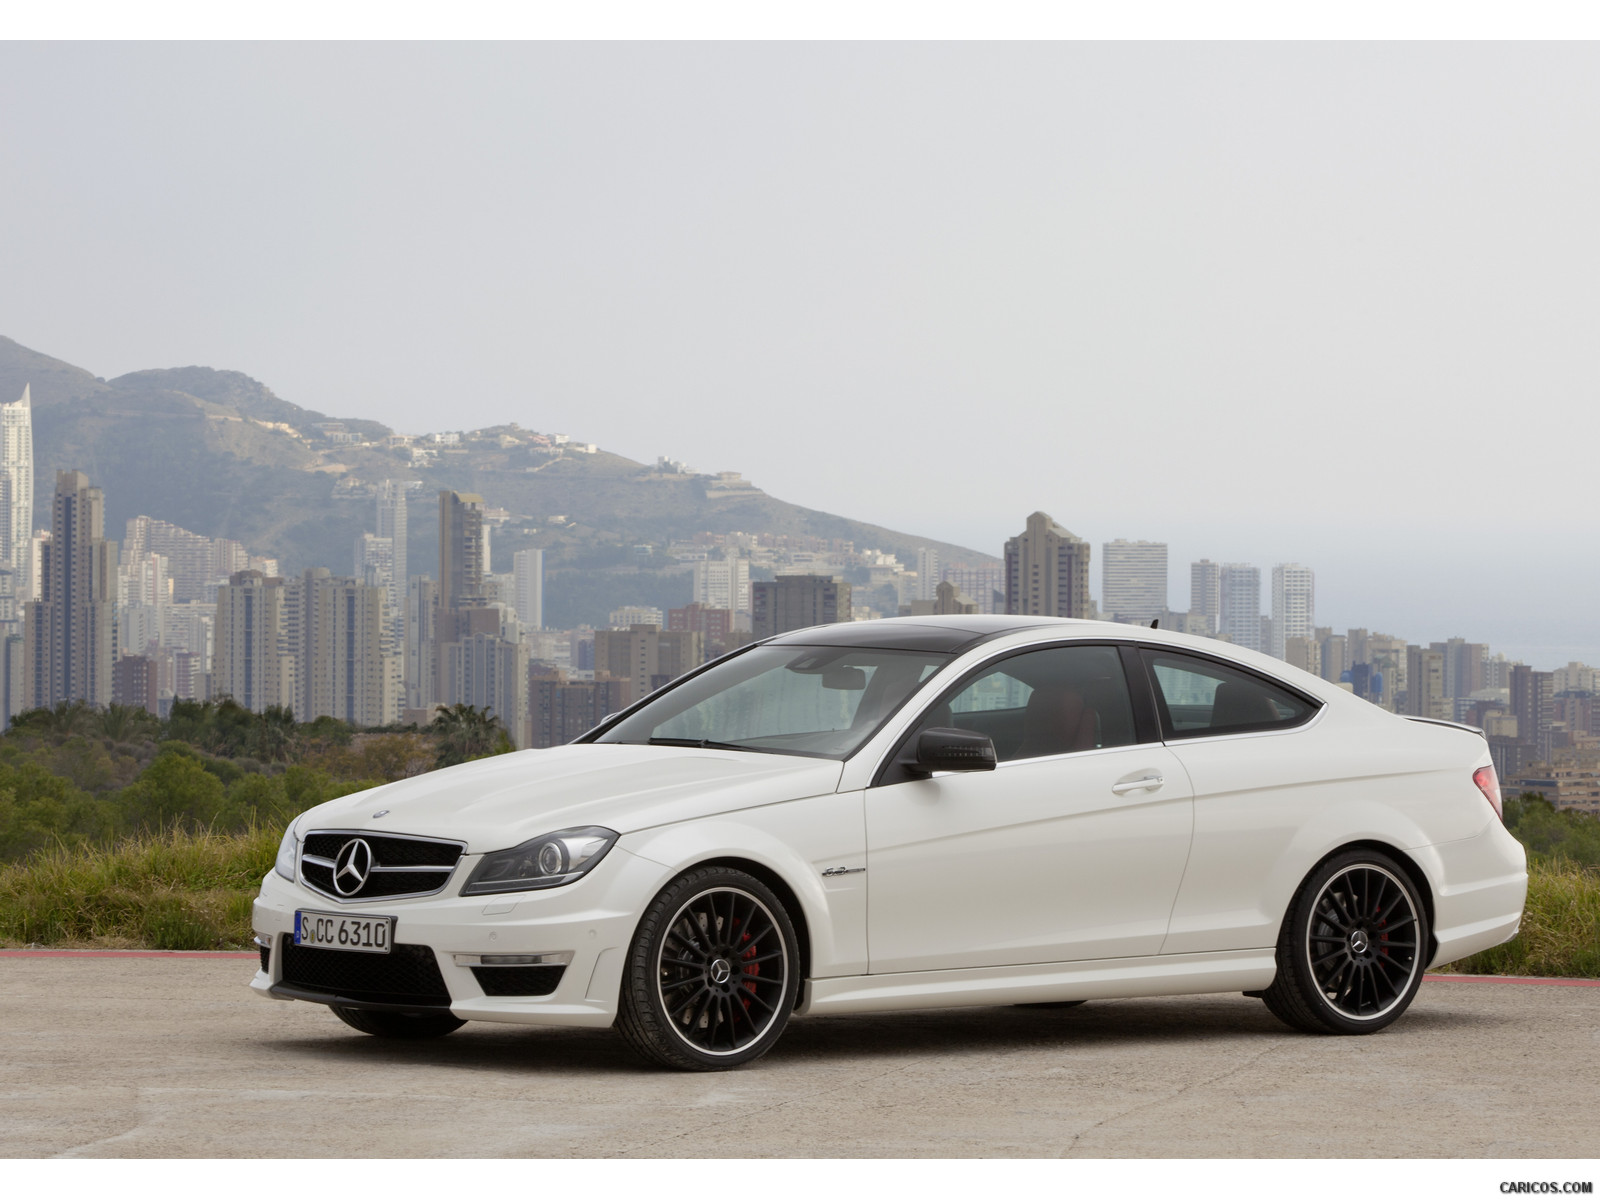 Mercedes-Benz C63 AMG Coupe (2012)  - Front, #43 of 64